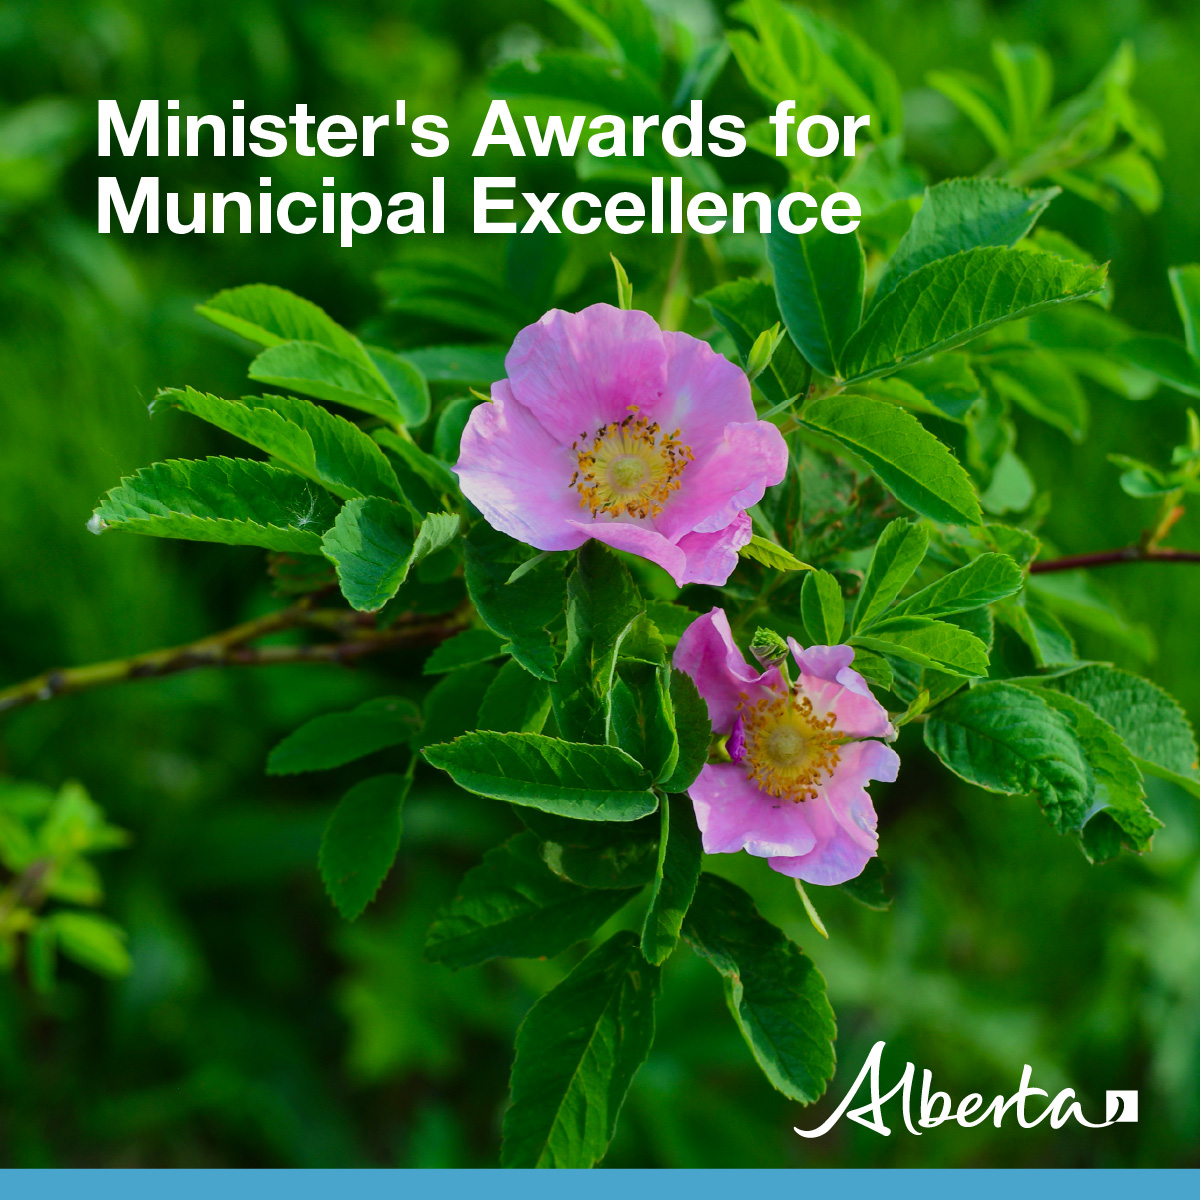 Minister's Award for Municipal Excellence